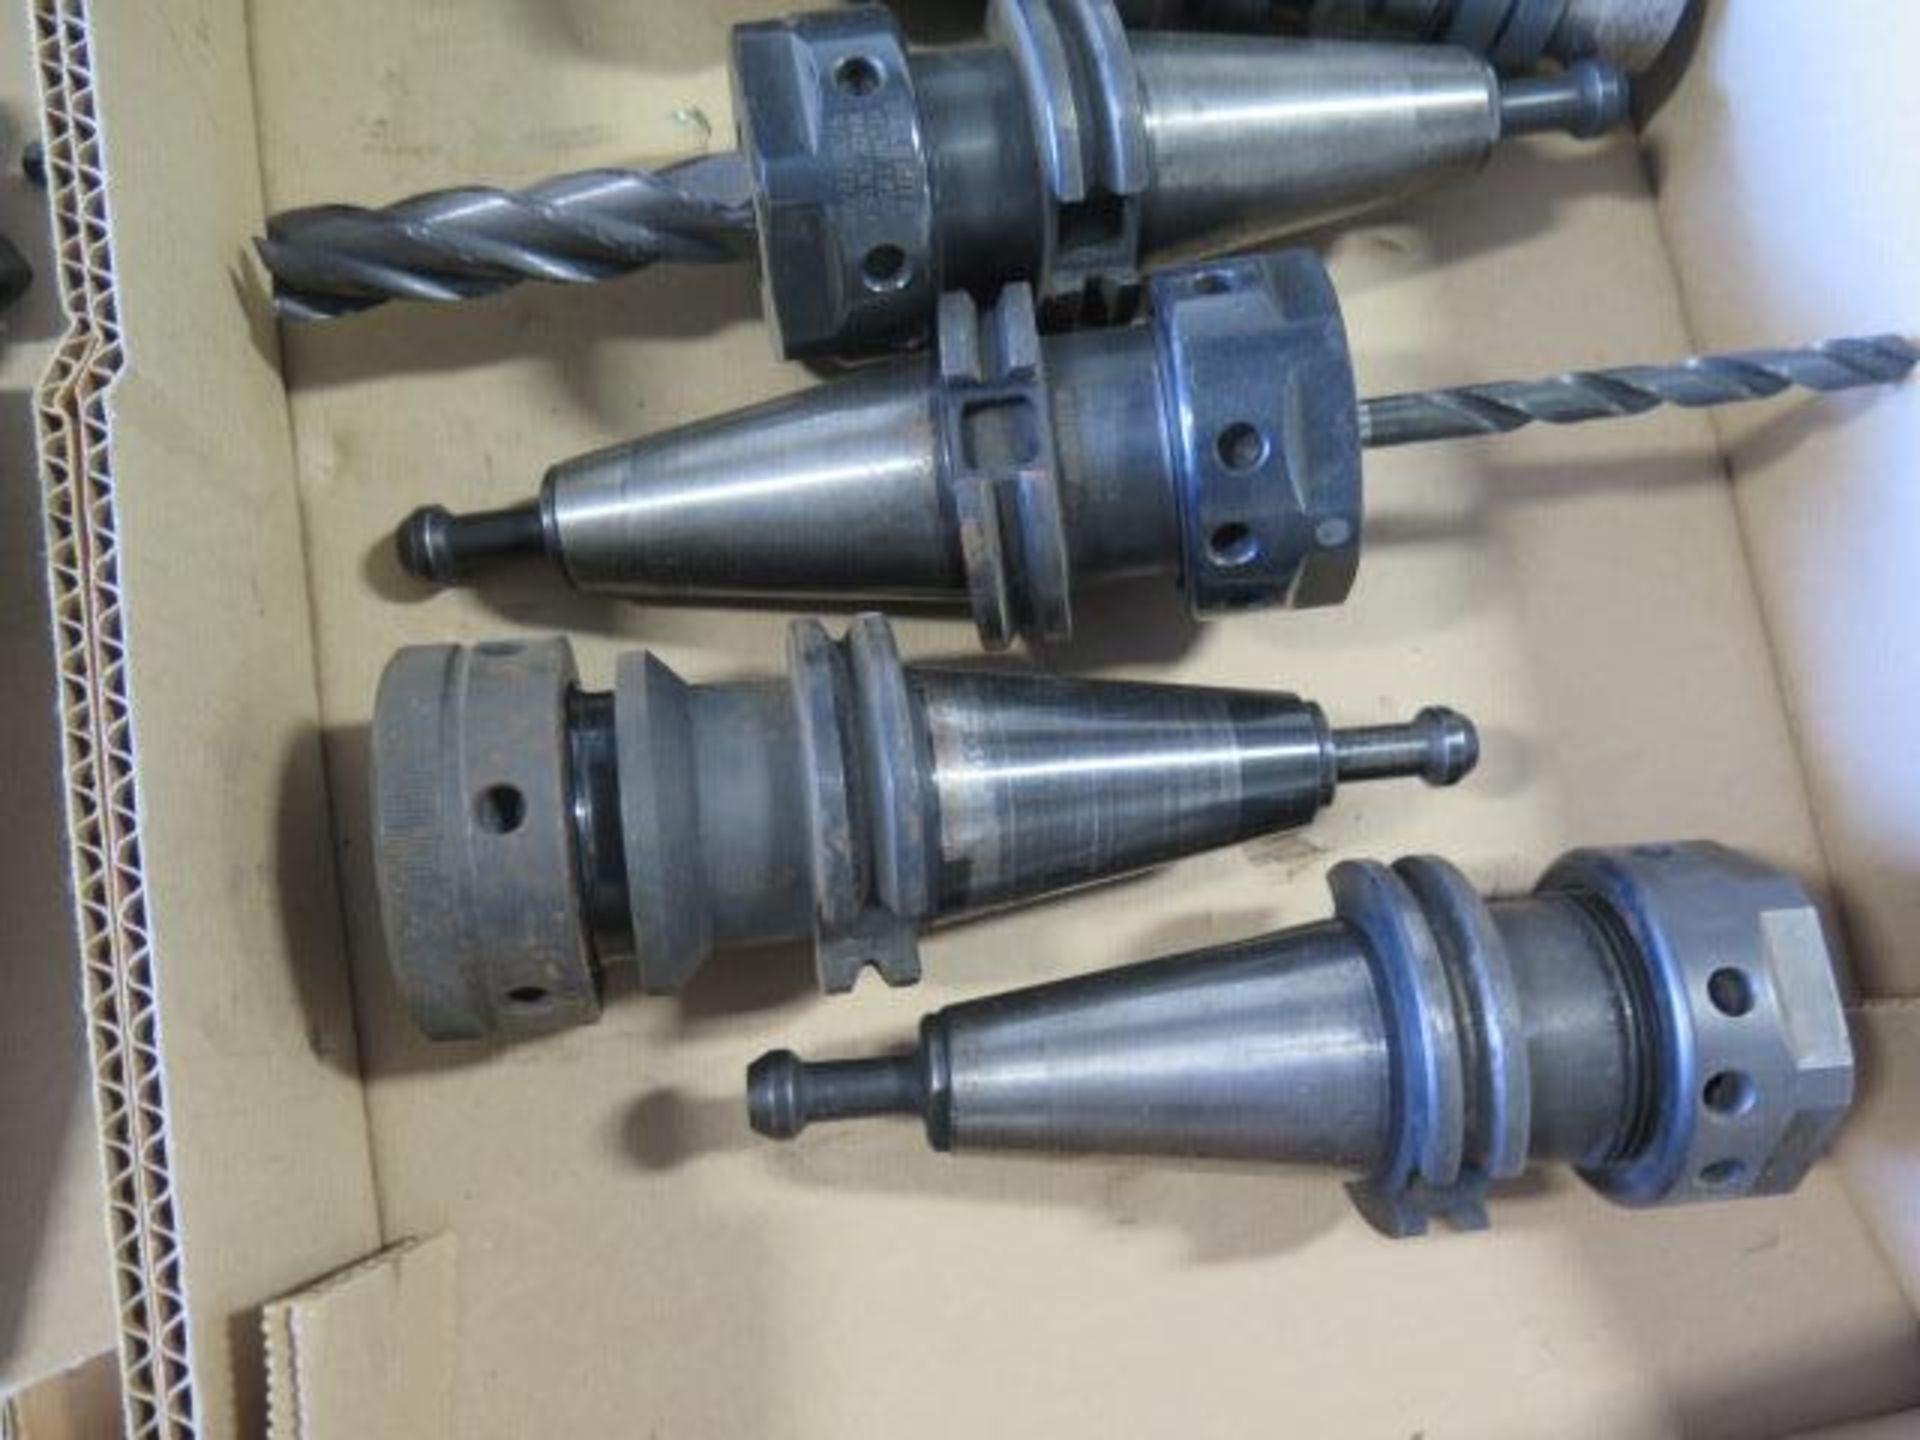 CAT-40 Taper TG-100 Collet Chucks and Drill Chcuk (5) (SOLD AS-IS - NO WARRANTY) - Image 4 of 4